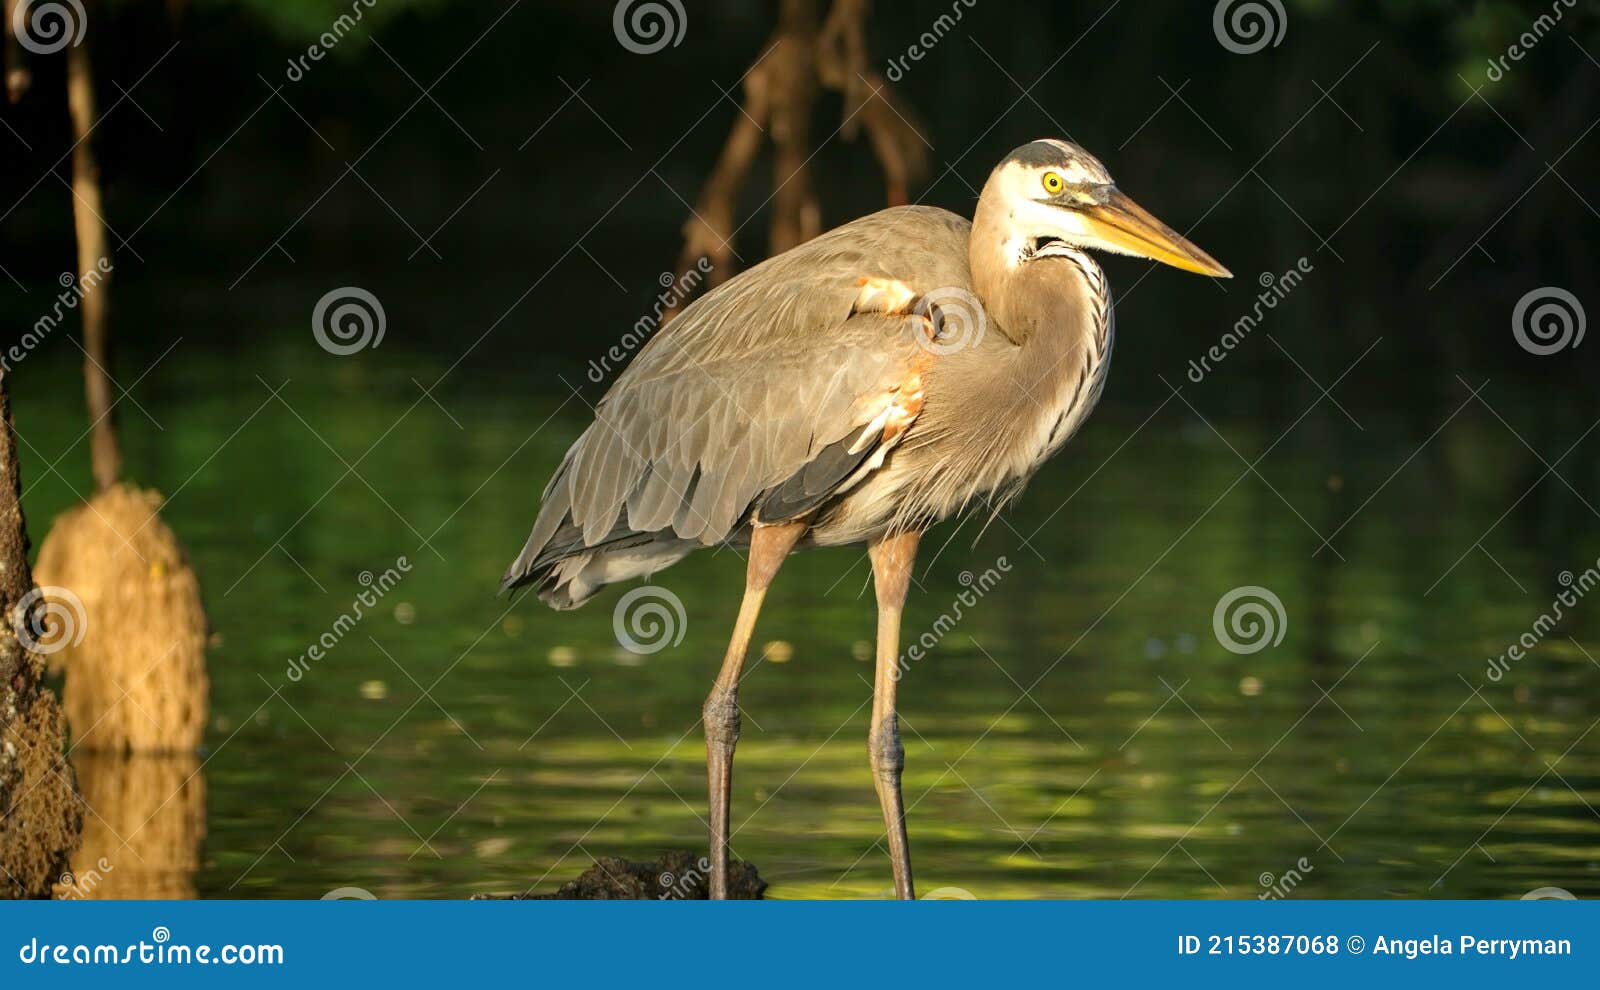 great blue heron in the galapagos islands